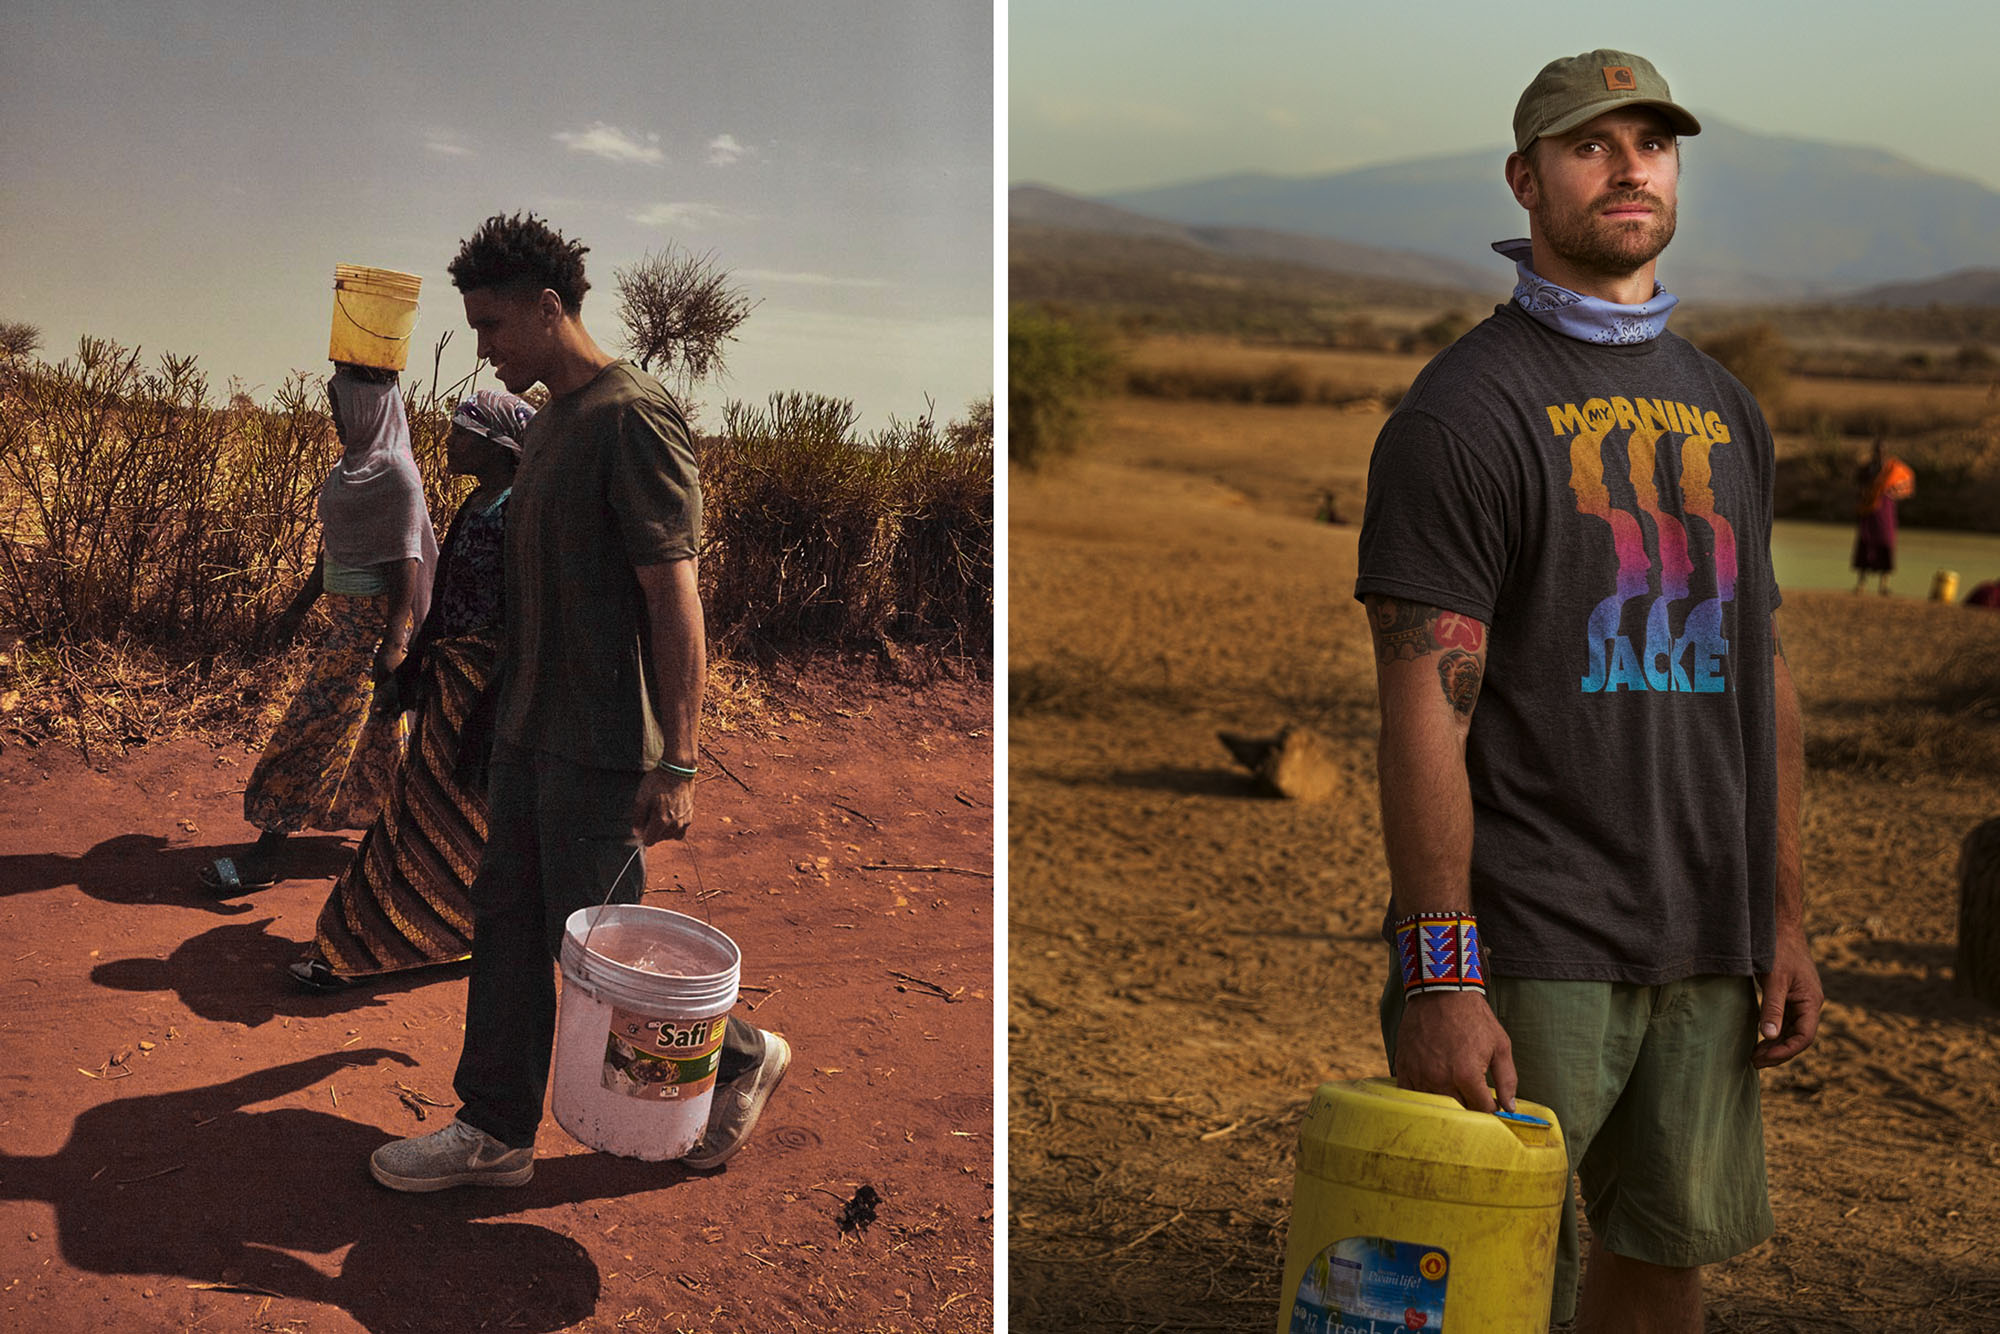 Well Building in Tanzania and former UVA football player Chris Long